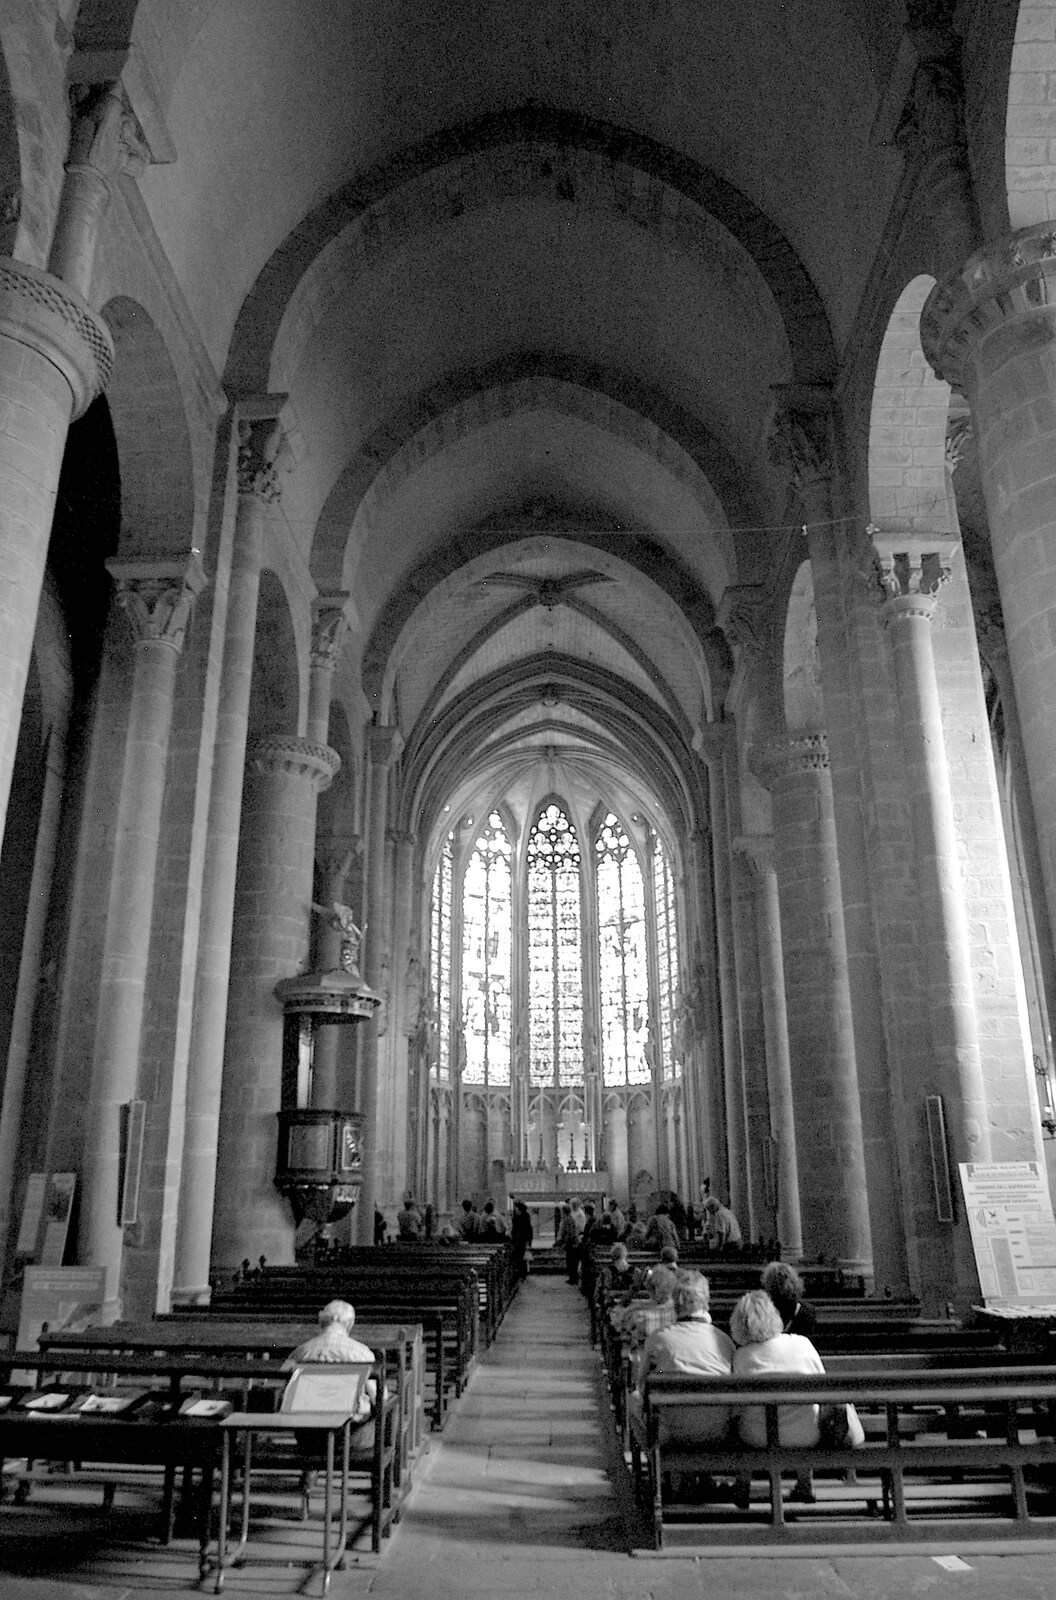 Inside the Basilique Saint-Nazaire from A Couple of Days in Carcassonne, Aude, France - 21st September 2006